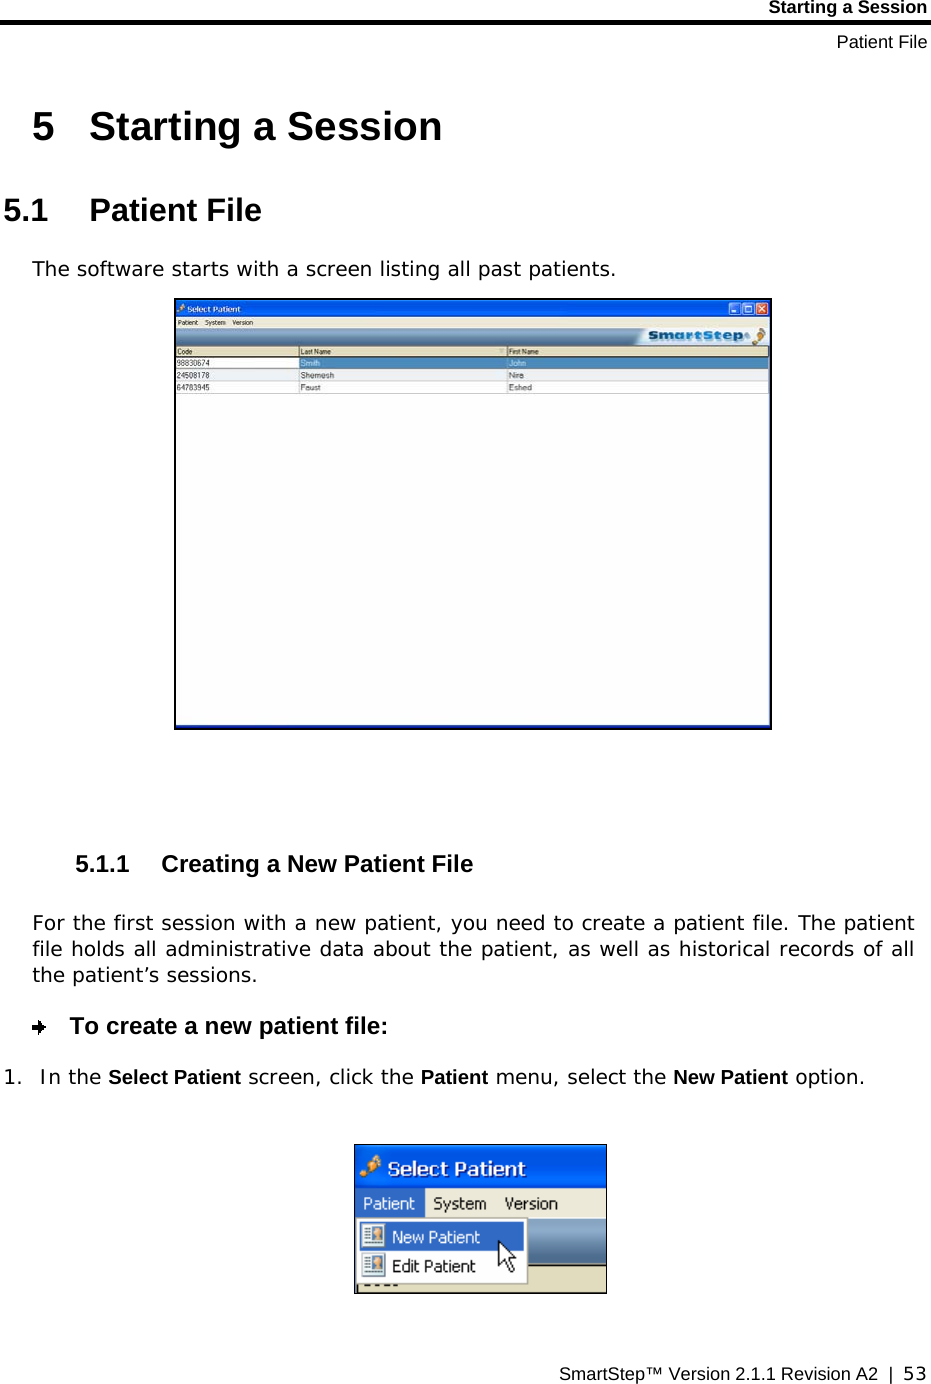 Starting a Session Patient File SmartStep™ Version 2.1.1 Revision A2  |  53  5 Starting a Session 5.1 Patient File  The software starts with a screen listing all past patients.    5.1.1  Creating a New Patient File For the first session with a new patient, you need to create a patient file. The patient file holds all administrative data about the patient, as well as historical records of all the patient’s sessions.    To create a new patient file: 1. In the Select Patient screen, click the Patient menu, select the New Patient option.    